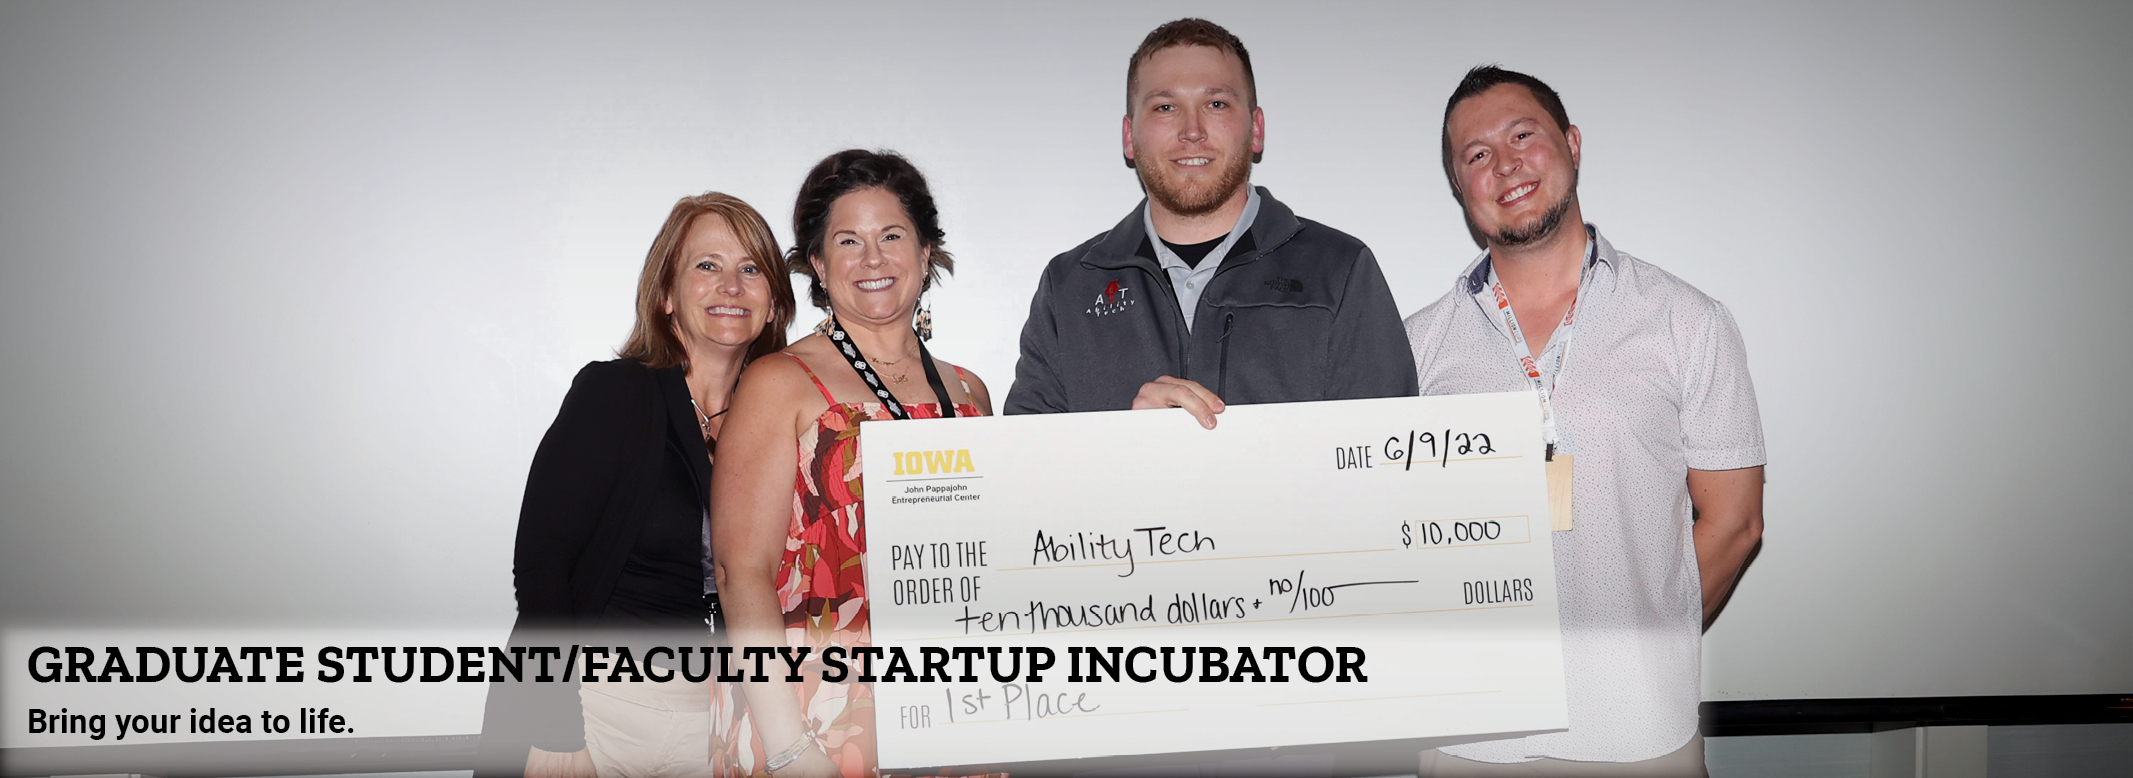 Grad Student and Faculty Startup Incubator Header_2